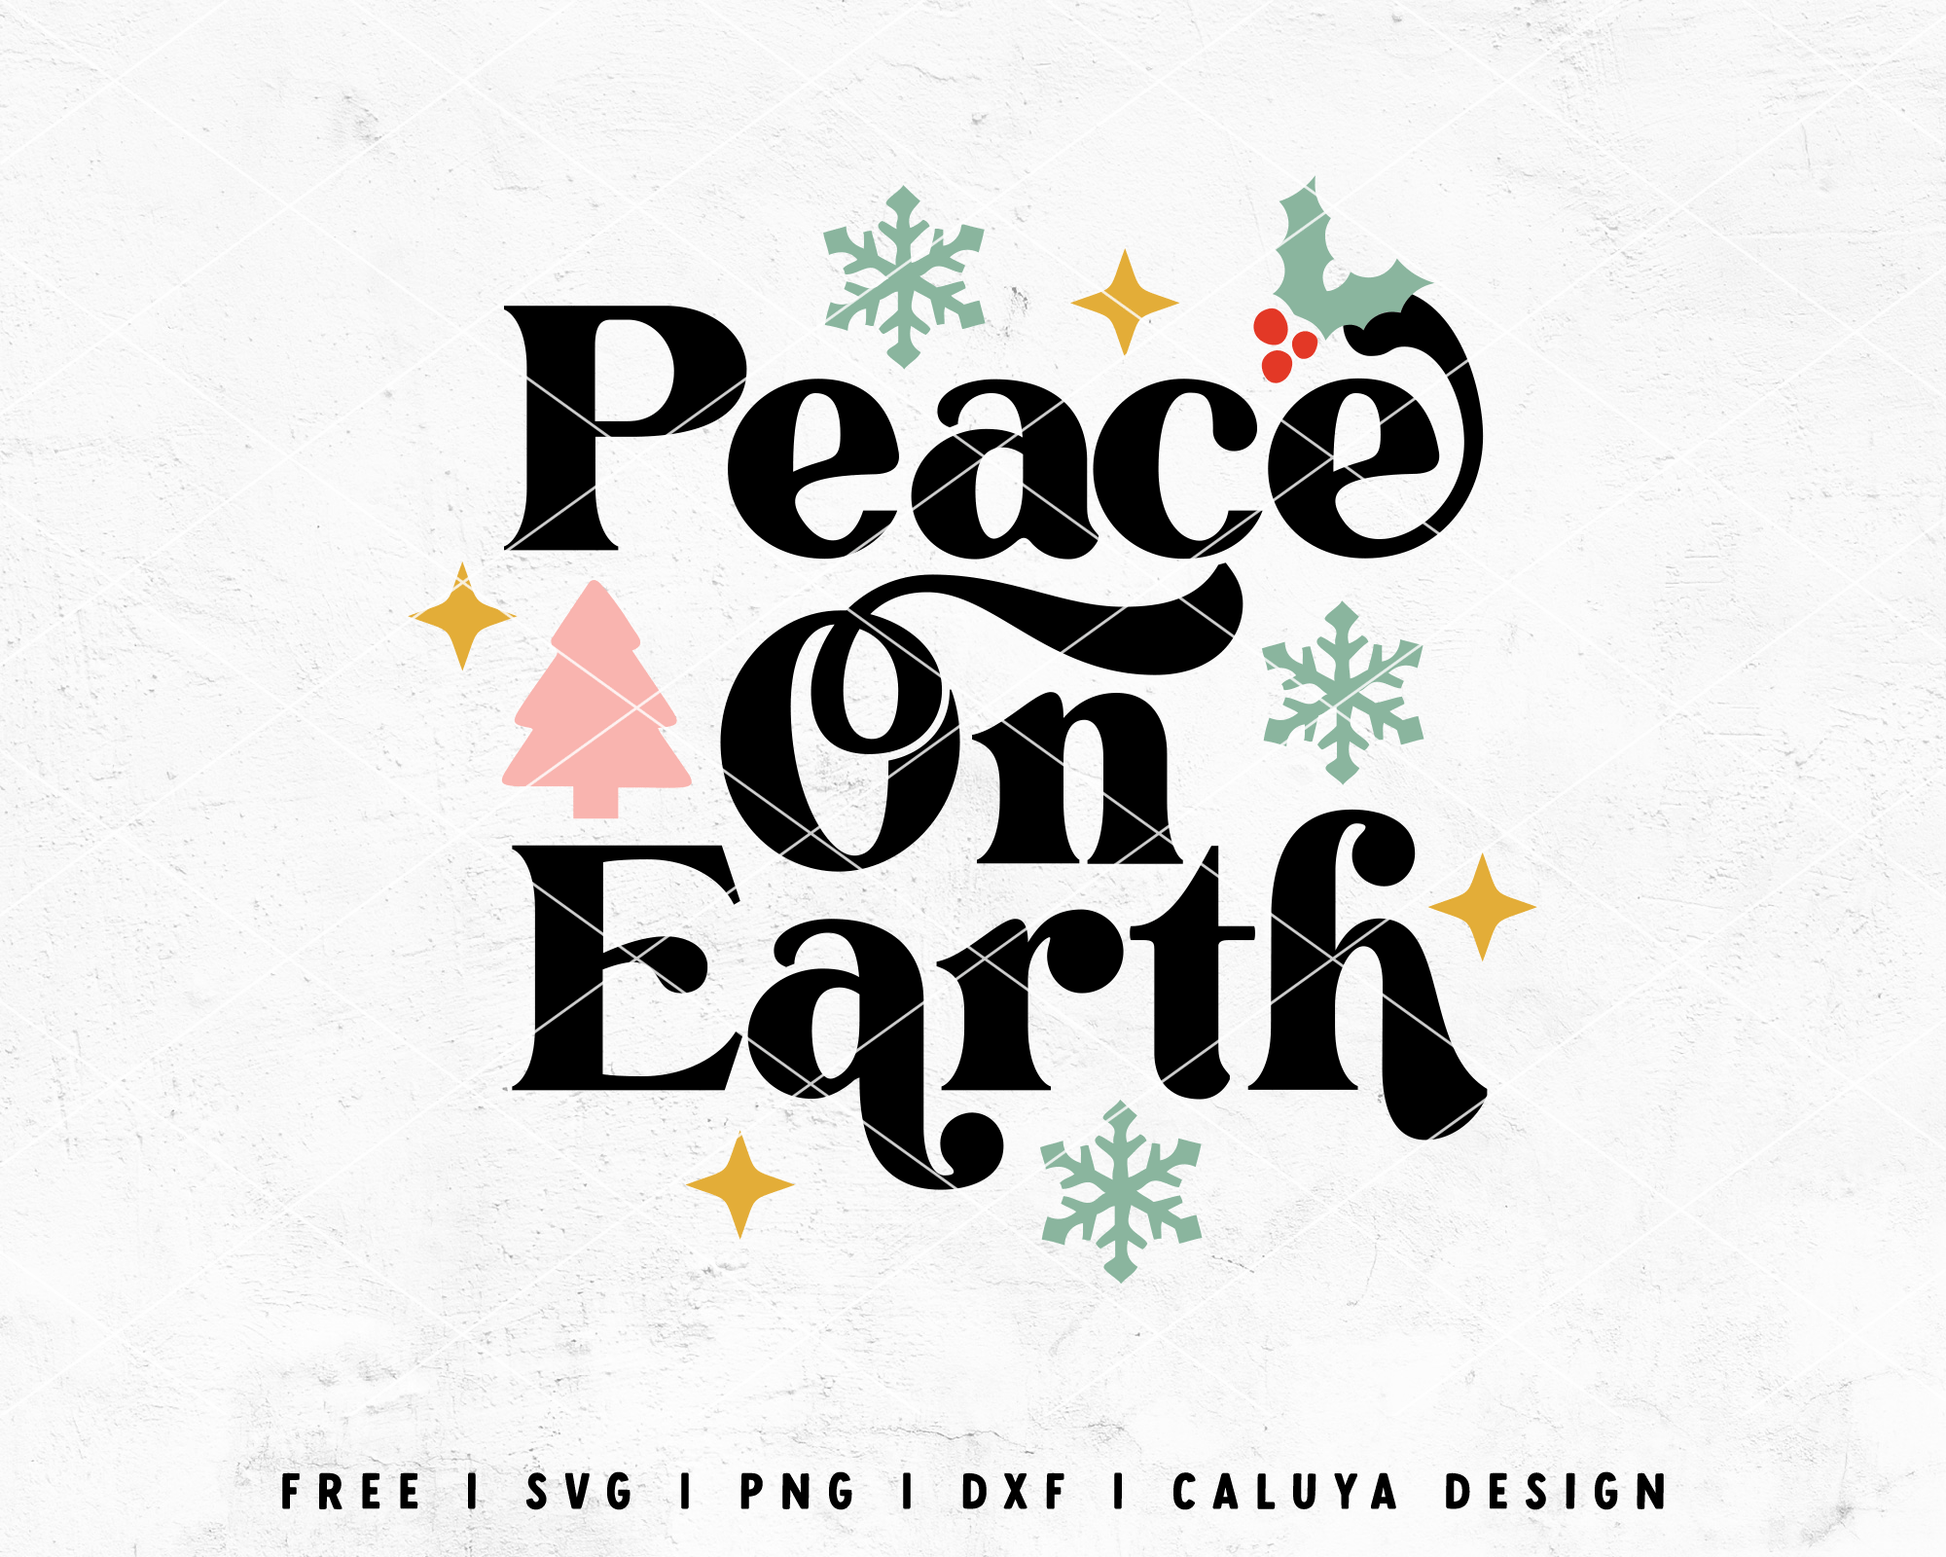 FREE Peach On Earth SVG | Christams Quote SVG Cut File for Cricut, Cameo Silhouette | Free SVG Cut File